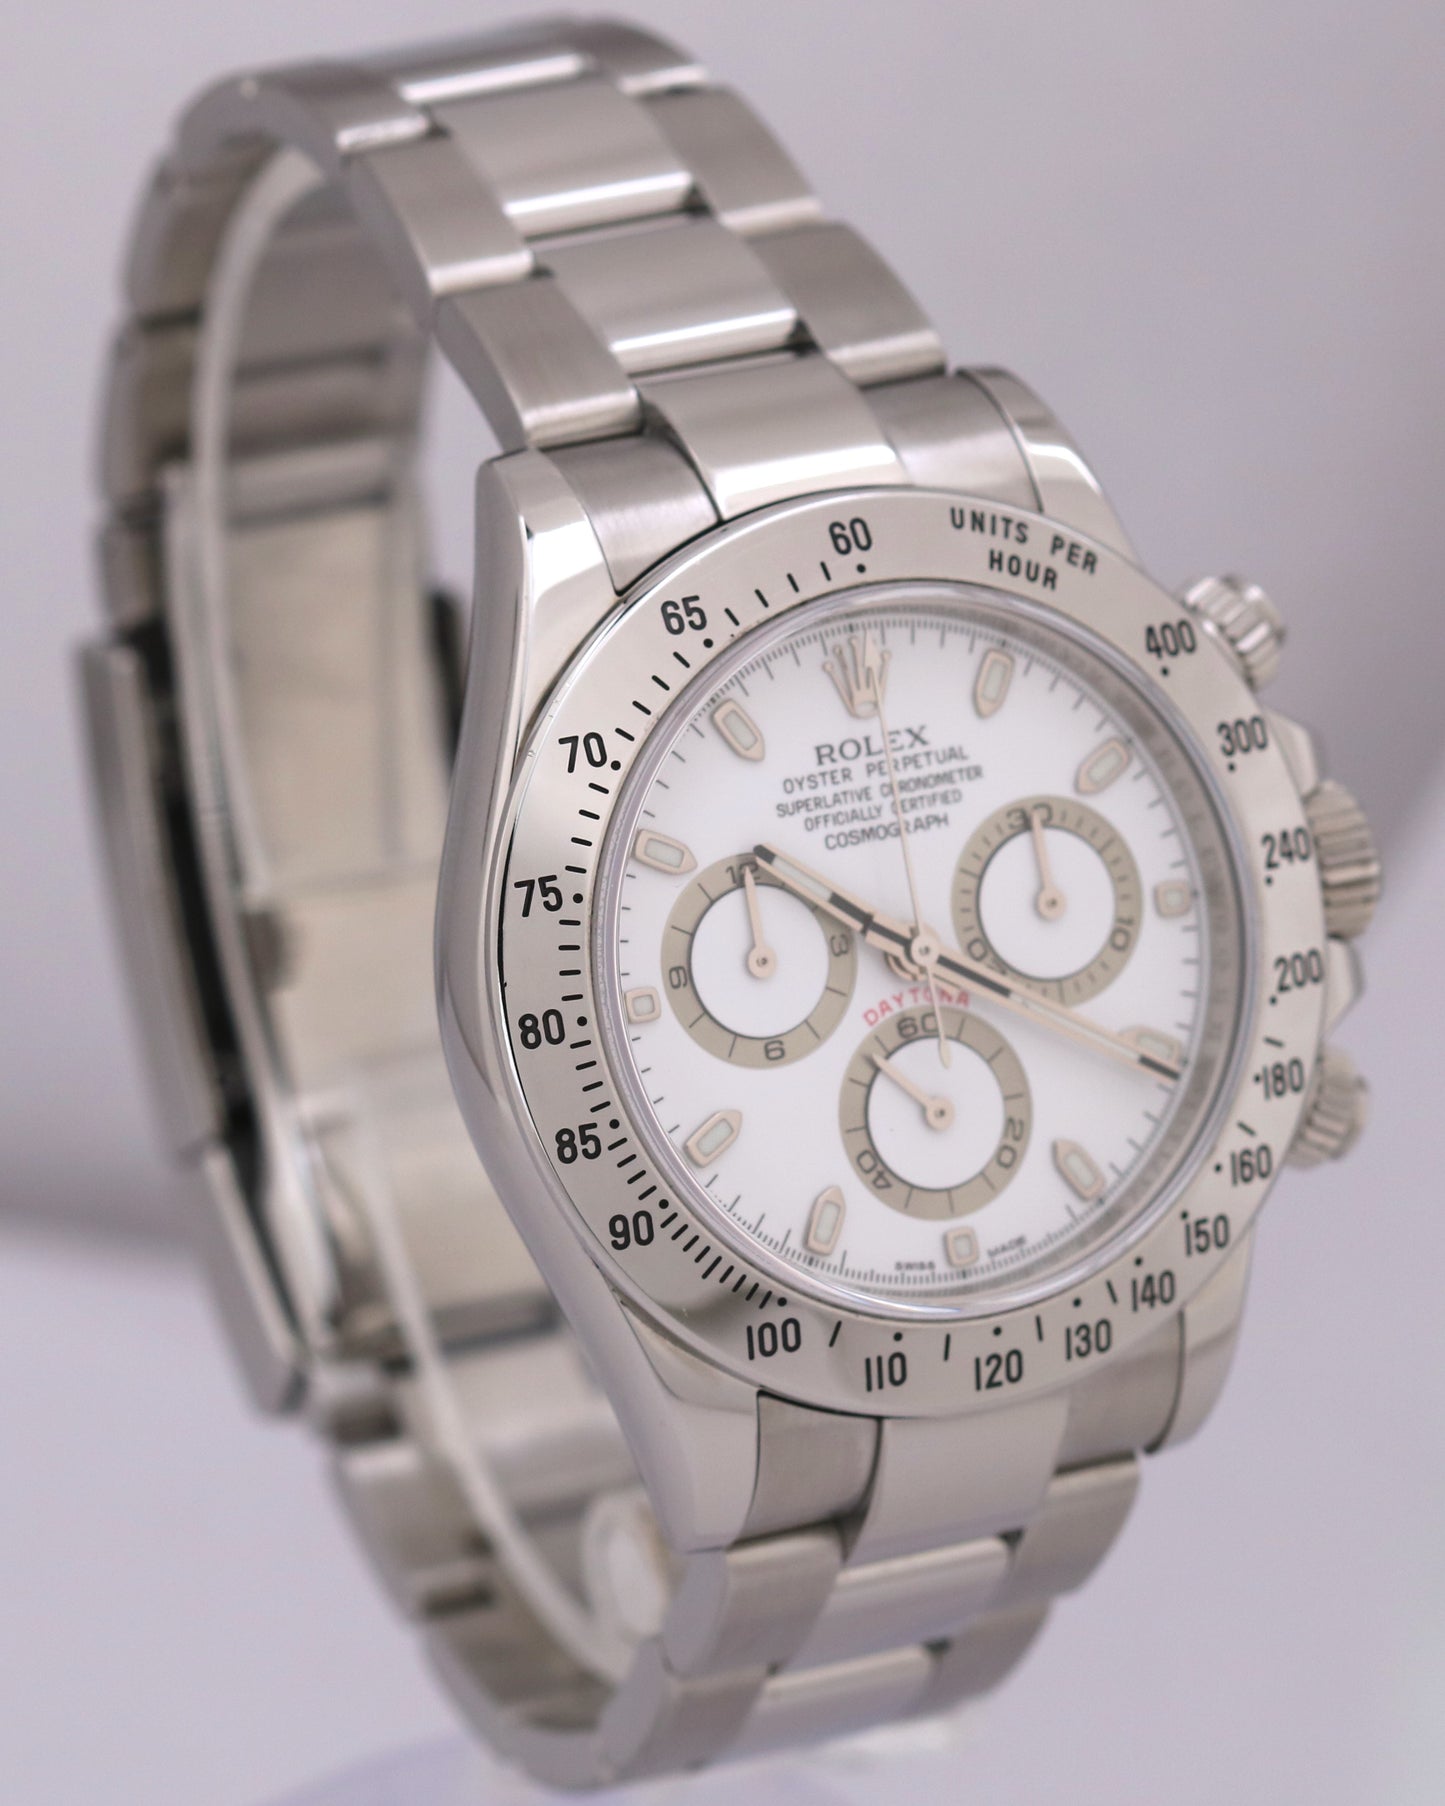 2013 Rolex Daytona Cosmograph White APH DIAL 40mm FAT BUCKLE Steel 116520 Watch